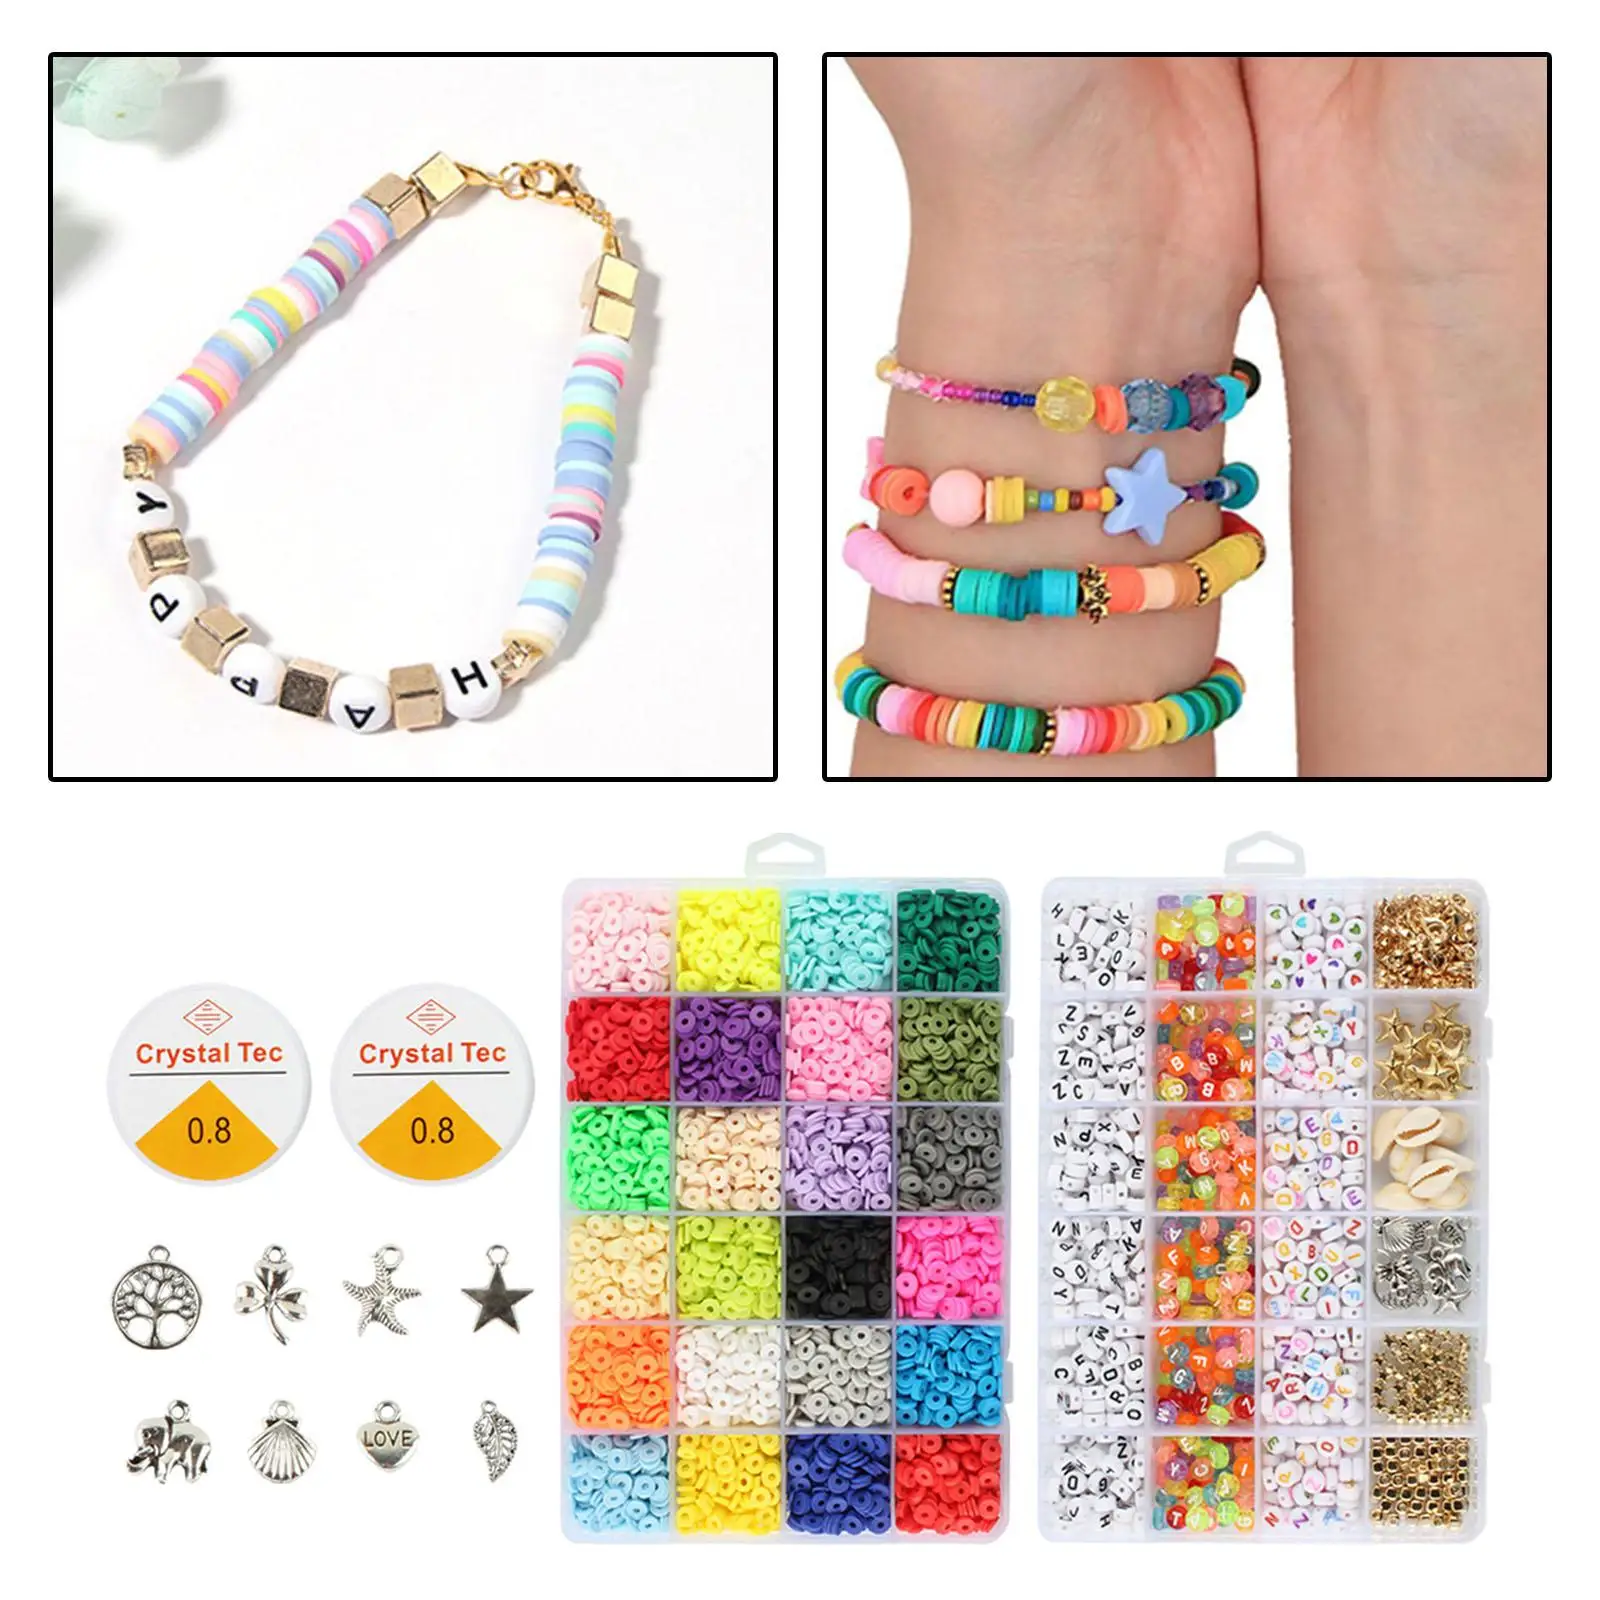 Polymer Clay Beads DIY Bracelets Jewelry Making Finding Crafts Supplies